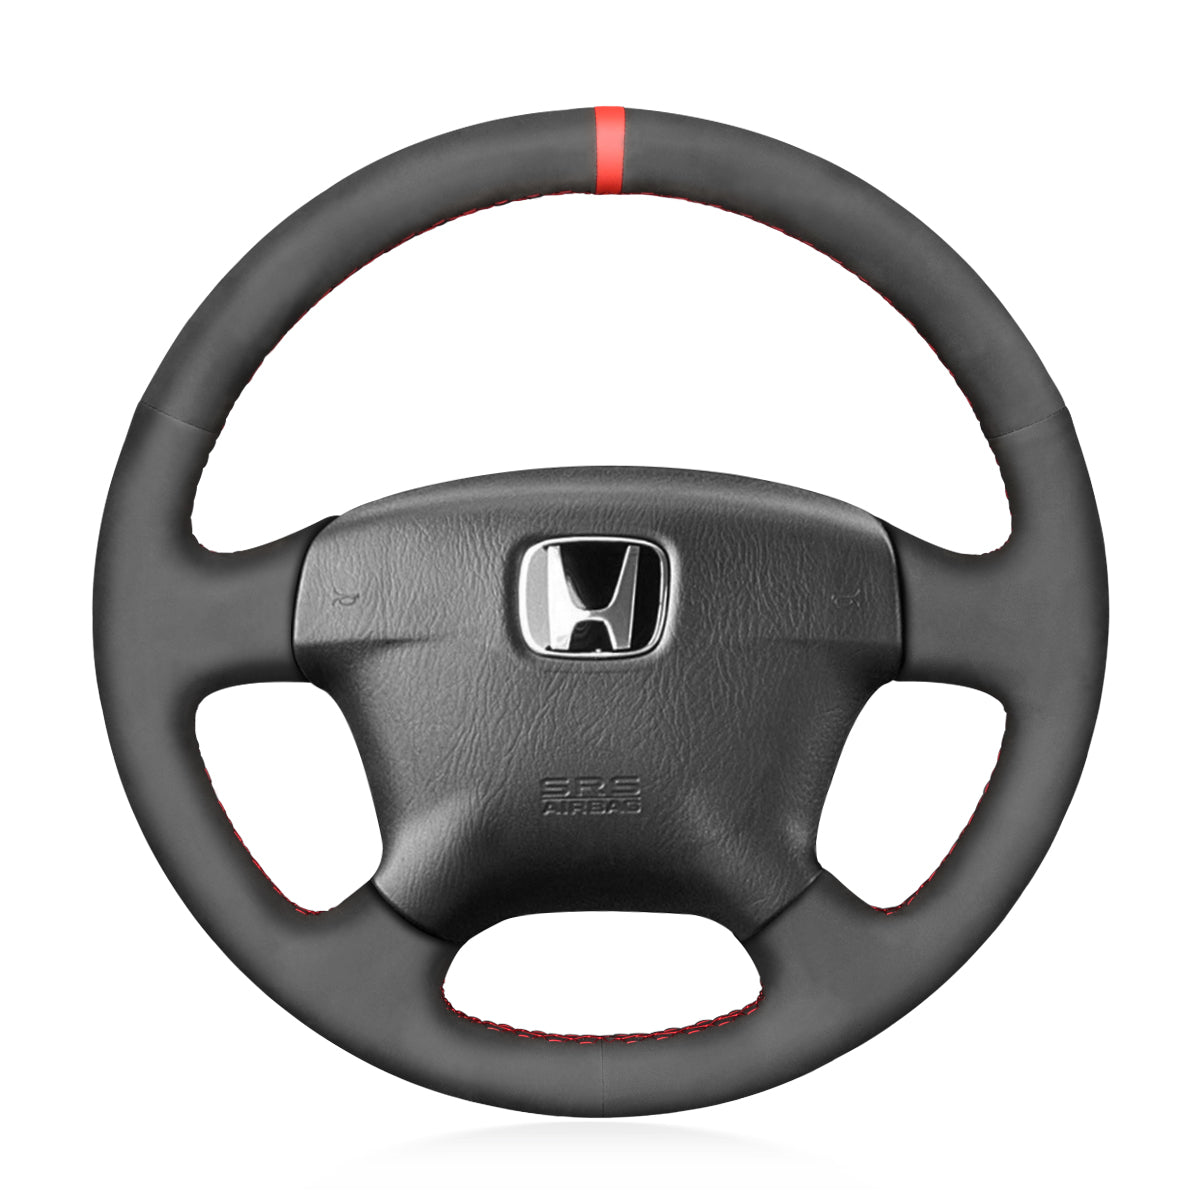 MEWANT Black Suede Car Steering Wheel Cover for Honda Civic 2001-2003 / Odyssey 2002-2004 / Stream 2000-2004